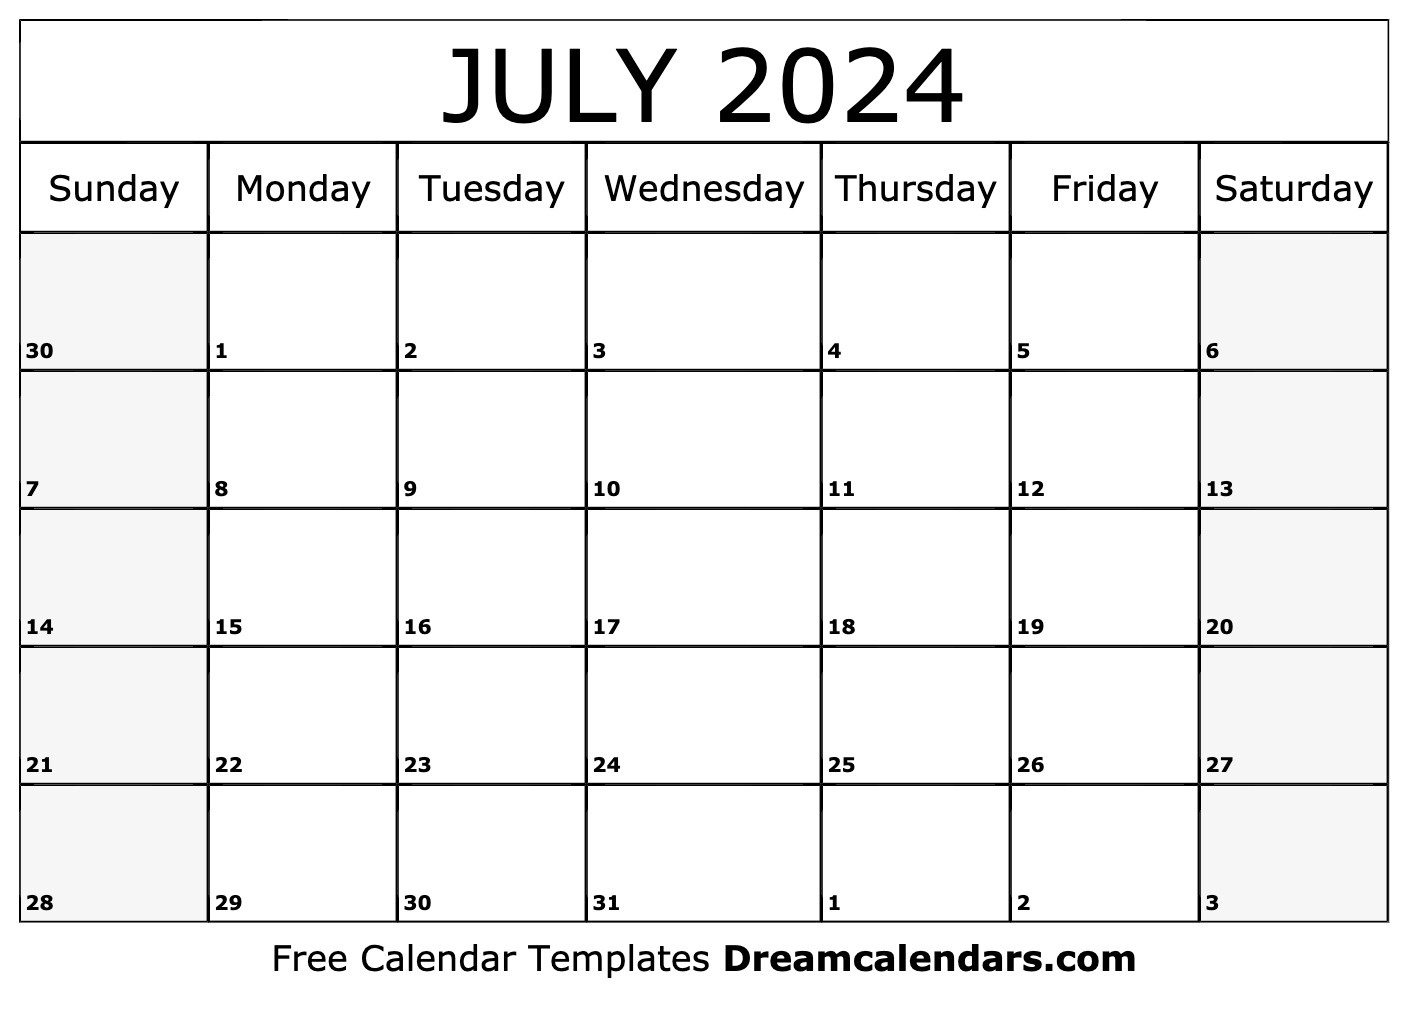 July 2024 Calendar - Free Printable With Holidays And Observances throughout 21 July 2024 Calendar Printable